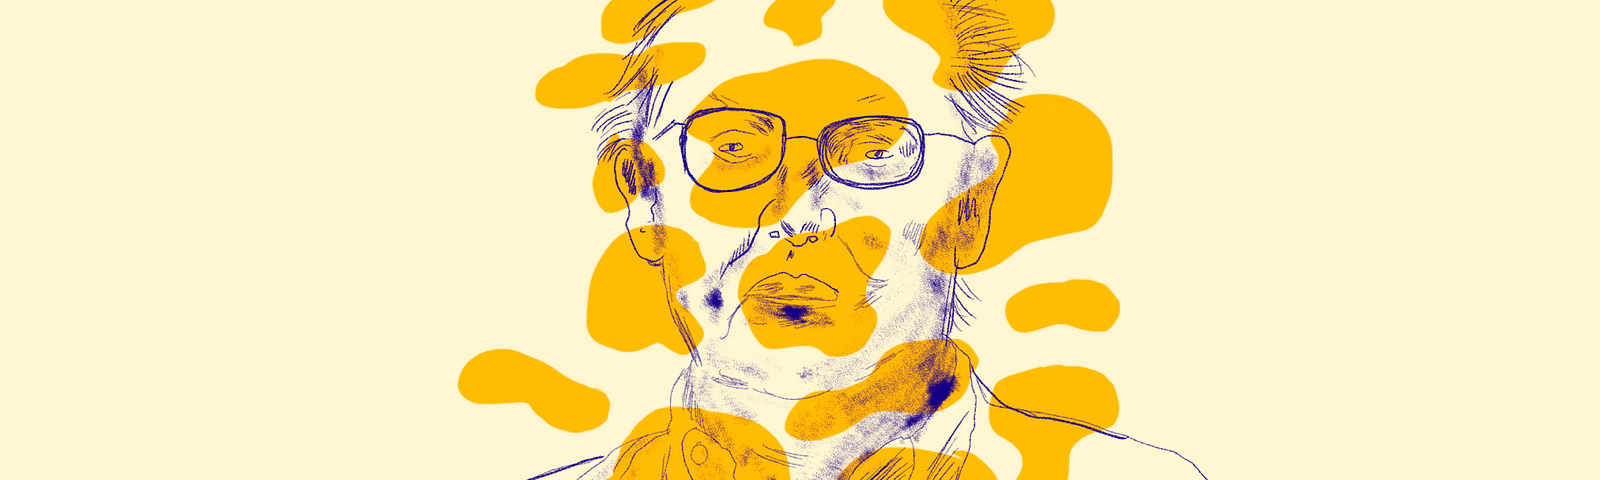 abstract portrait of concerned man wearing glasses with pastel colors including yellow.